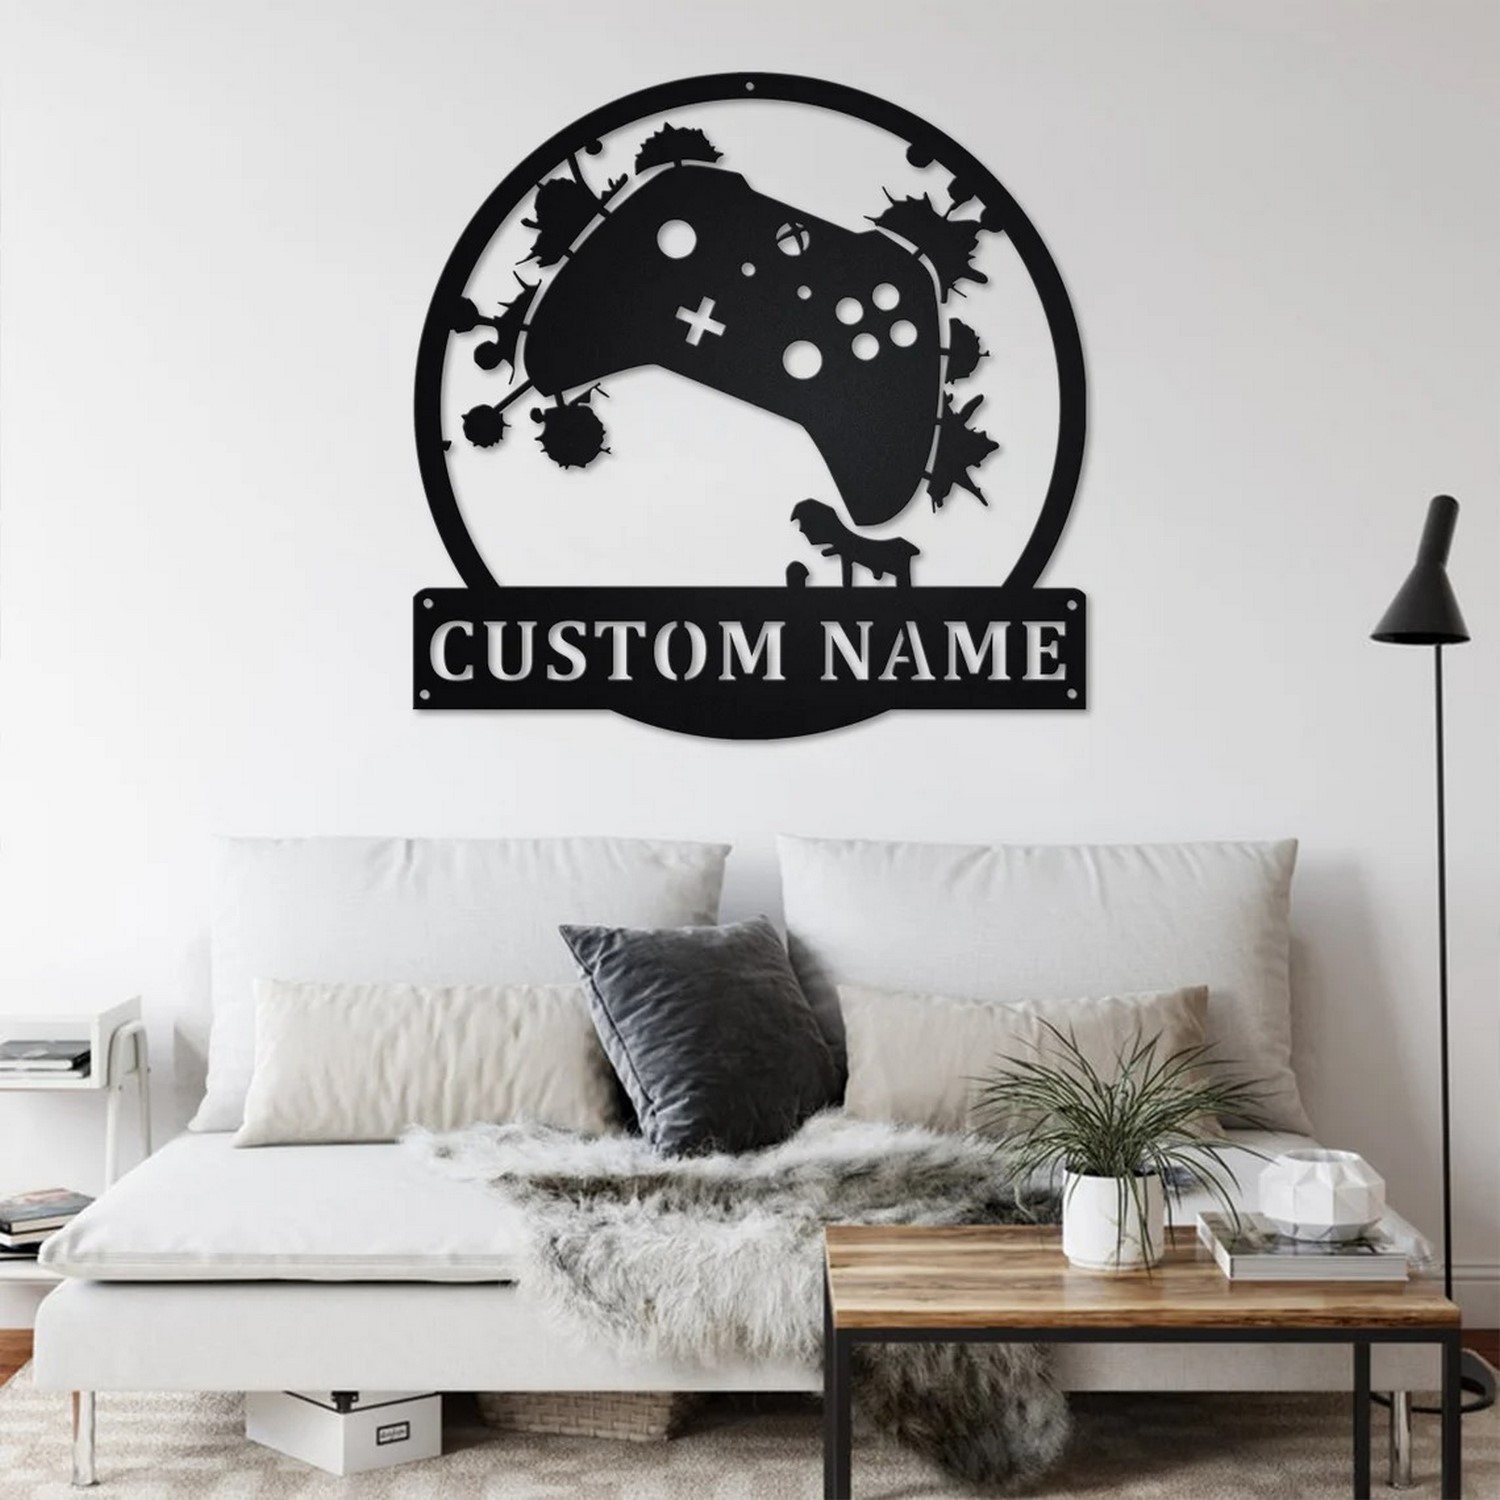 PERSONALIZED GAMING STICKERS